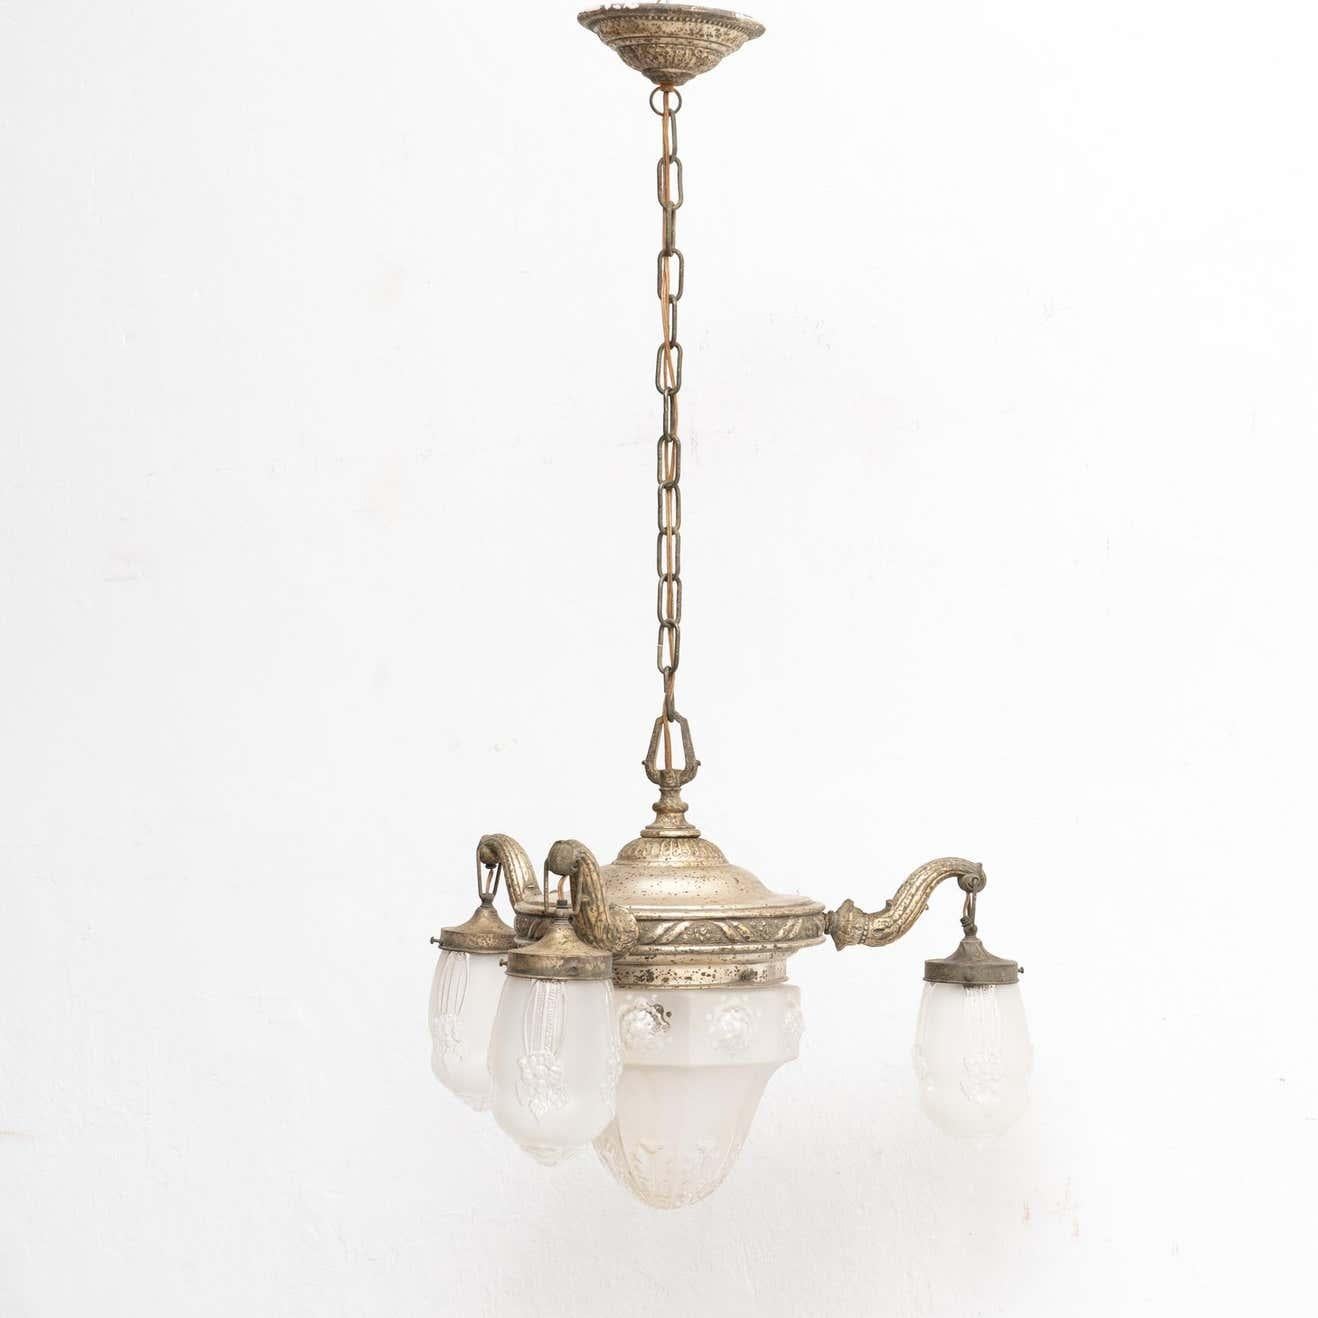 French vintage metal and glass Art Deco hanging lamp.

By unknown manufacturer from France, circa 1930.

In original condition, with minor wear consistent with age and use, preserving a beautiful patina.

Materials:
Glass
Metal.
 